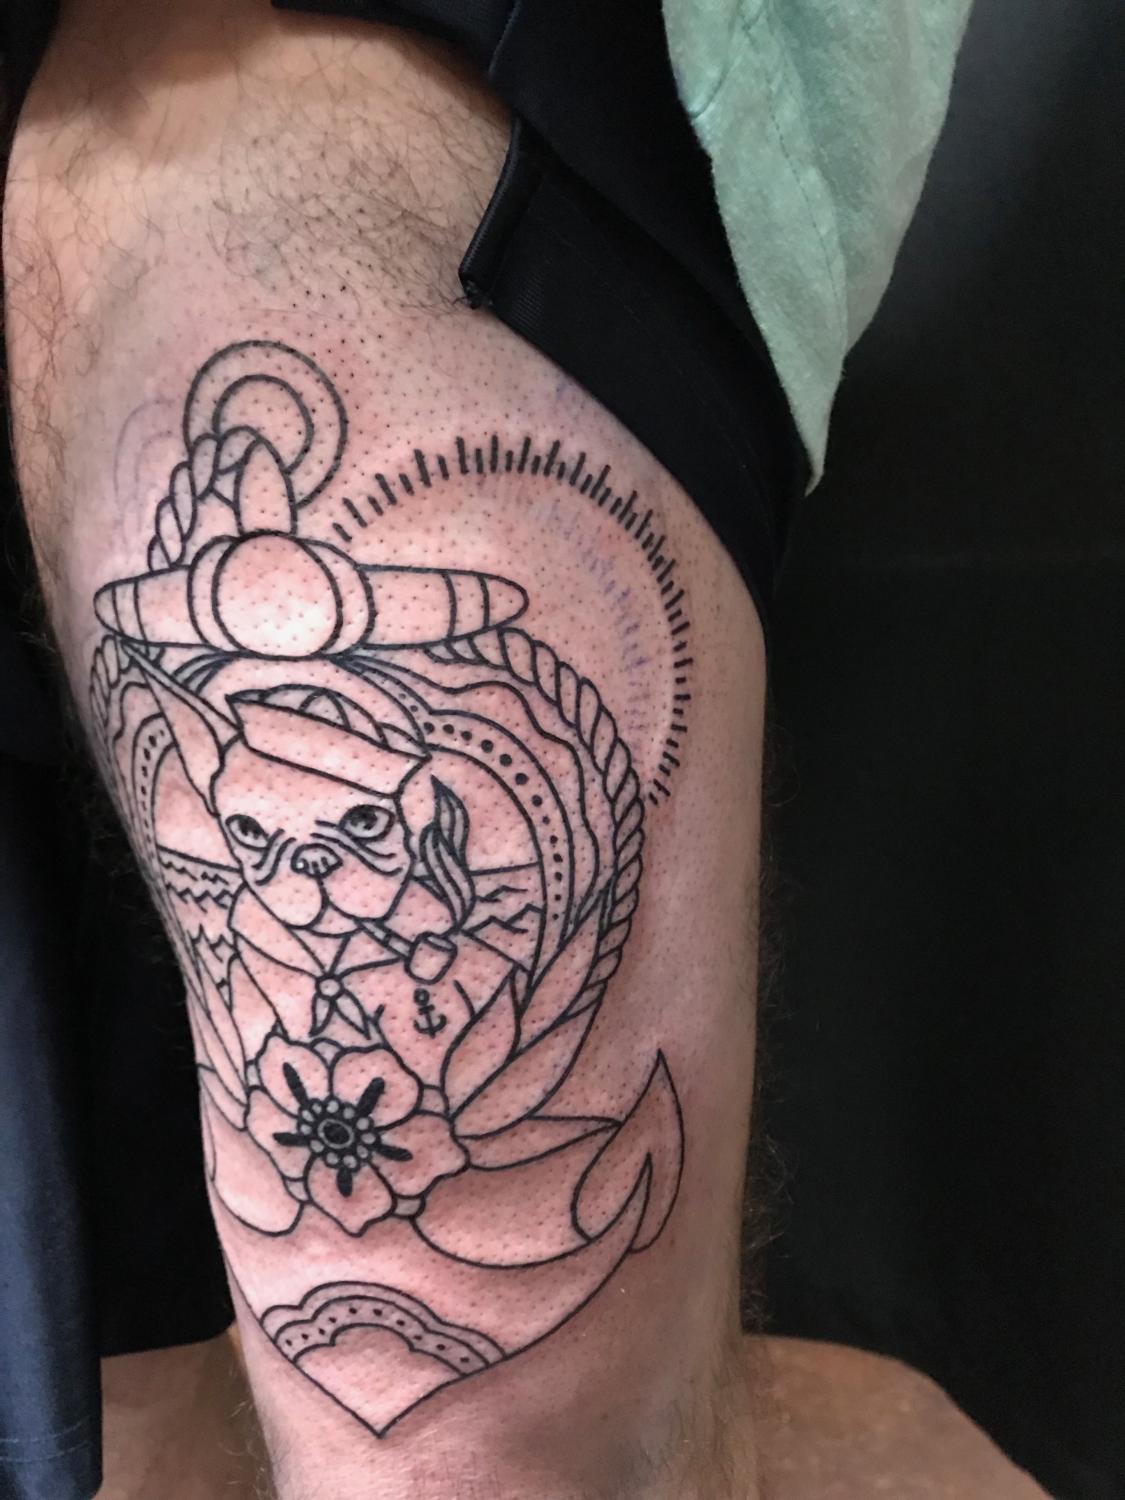 LISA ORTH is relocating to Los Angeles and I want her to tattoo me p bad   Engraving tattoo Lantern tattoo Woodcut tattoo